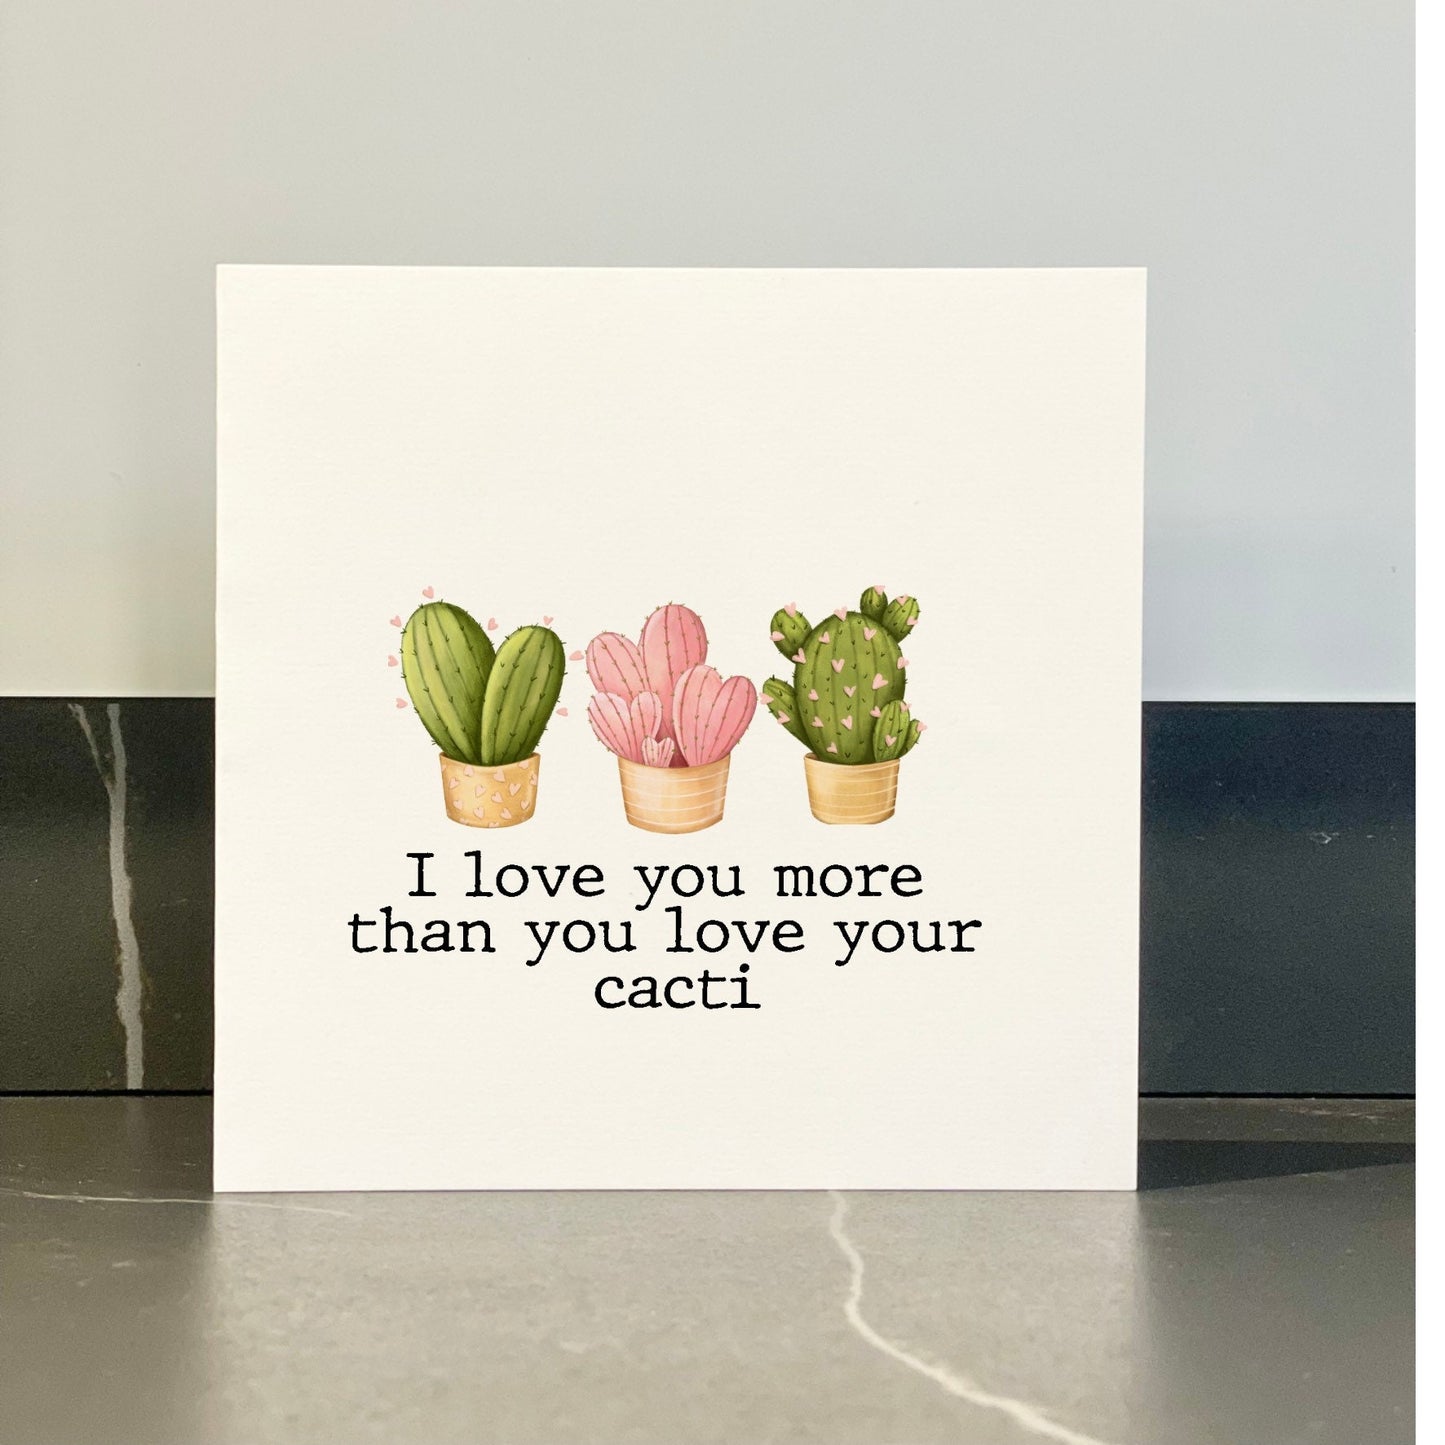 Cactus Valentine’s Day card, funny succulent cactus card, novelty Girlfriend boyfriend card, plant loving girlfriend cards